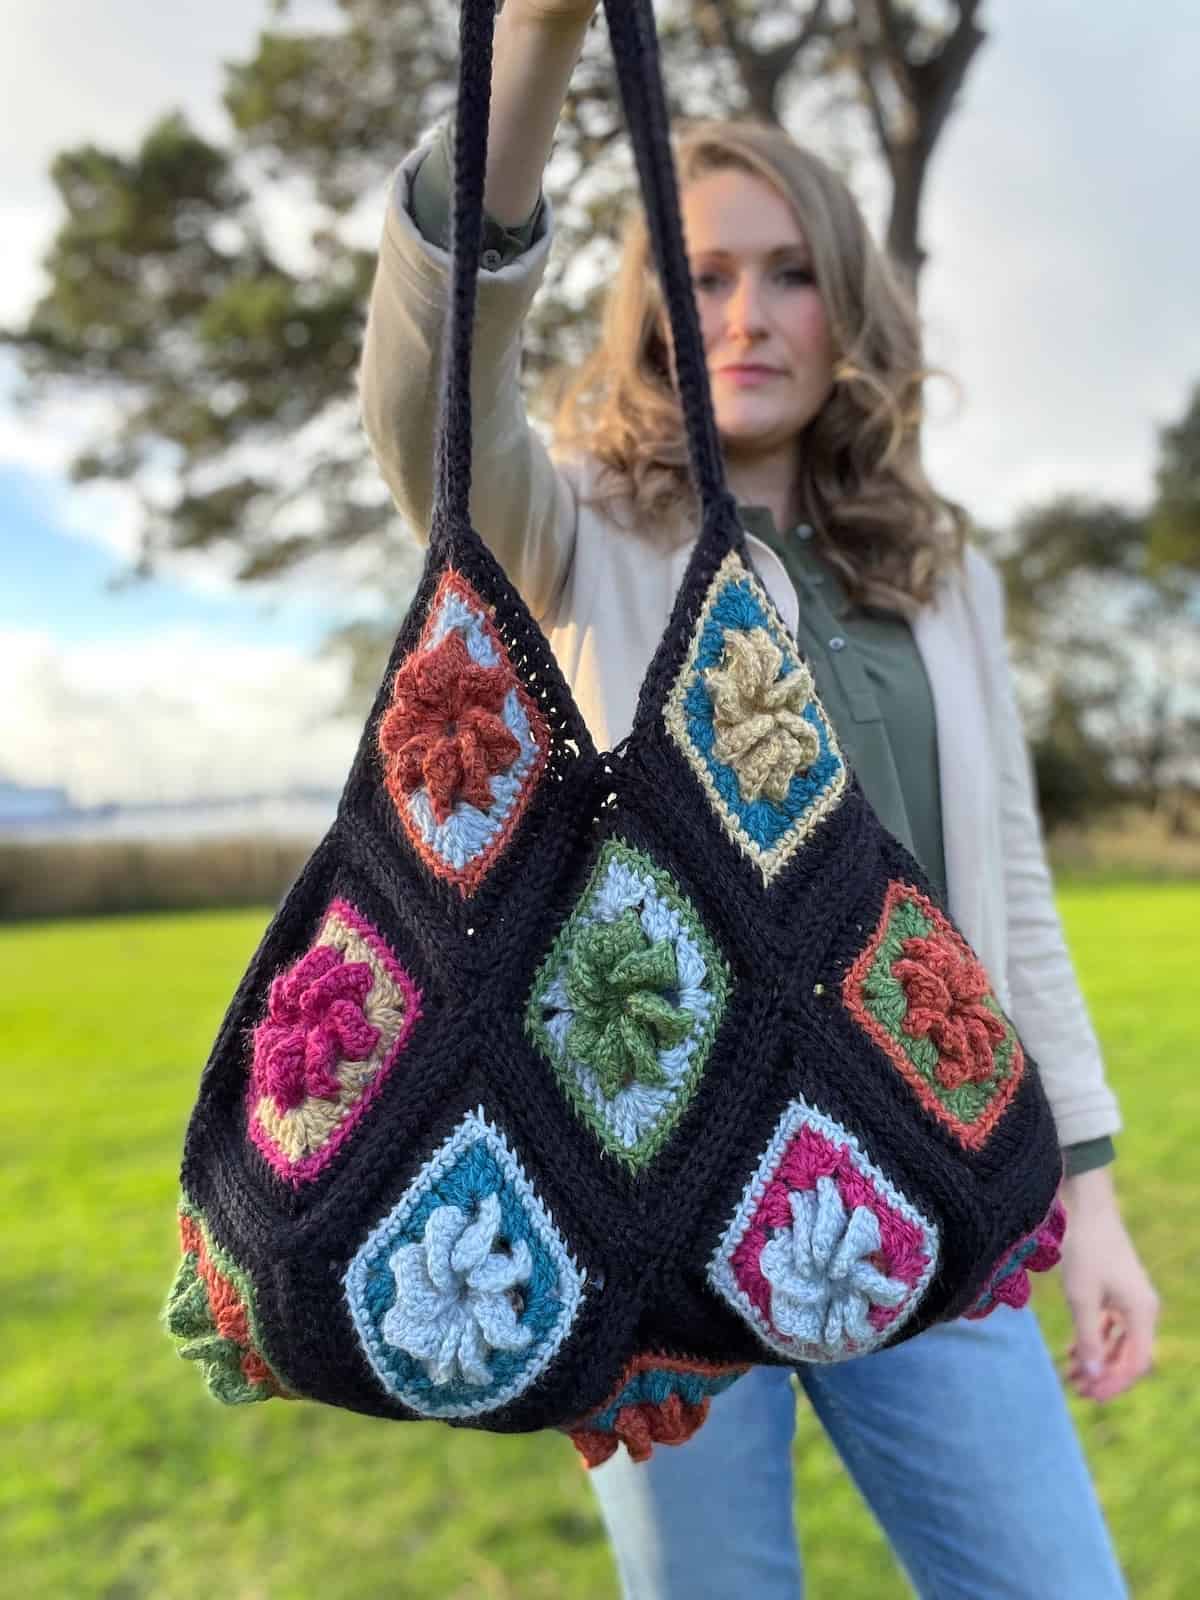 A woman holding a crocheted bag in the grass.